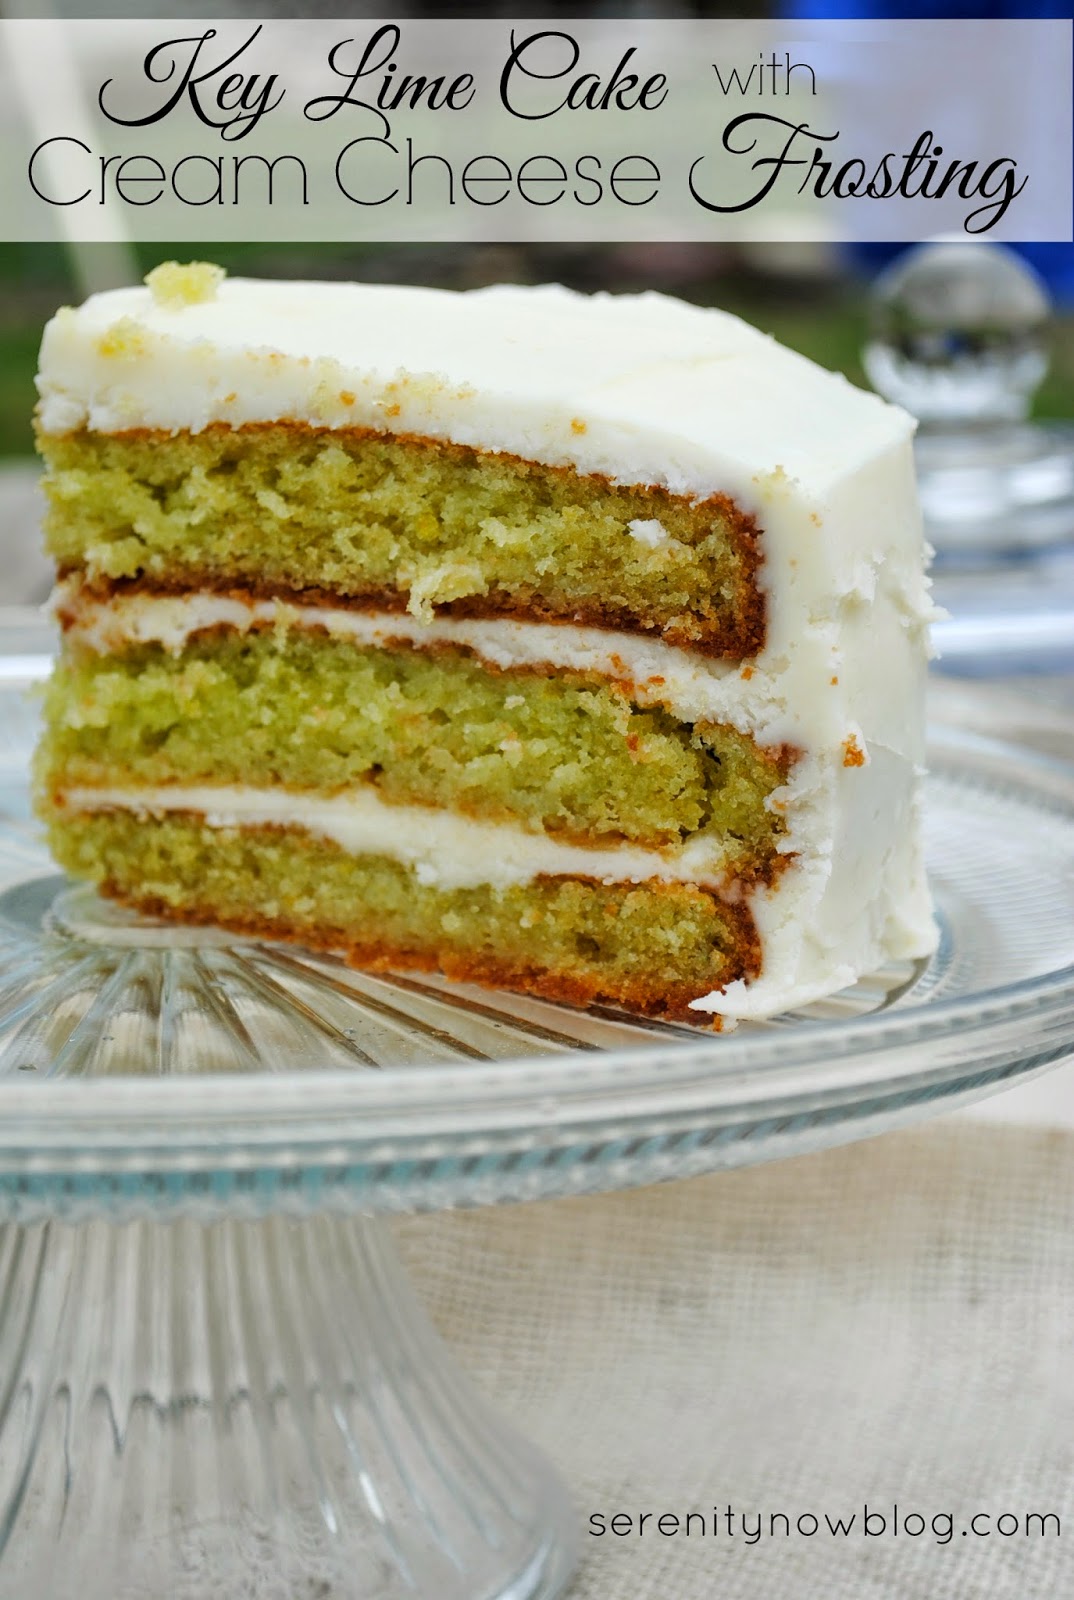 Key Lime Cake with homemade Cream Cheese Frosting, from Serenity Now